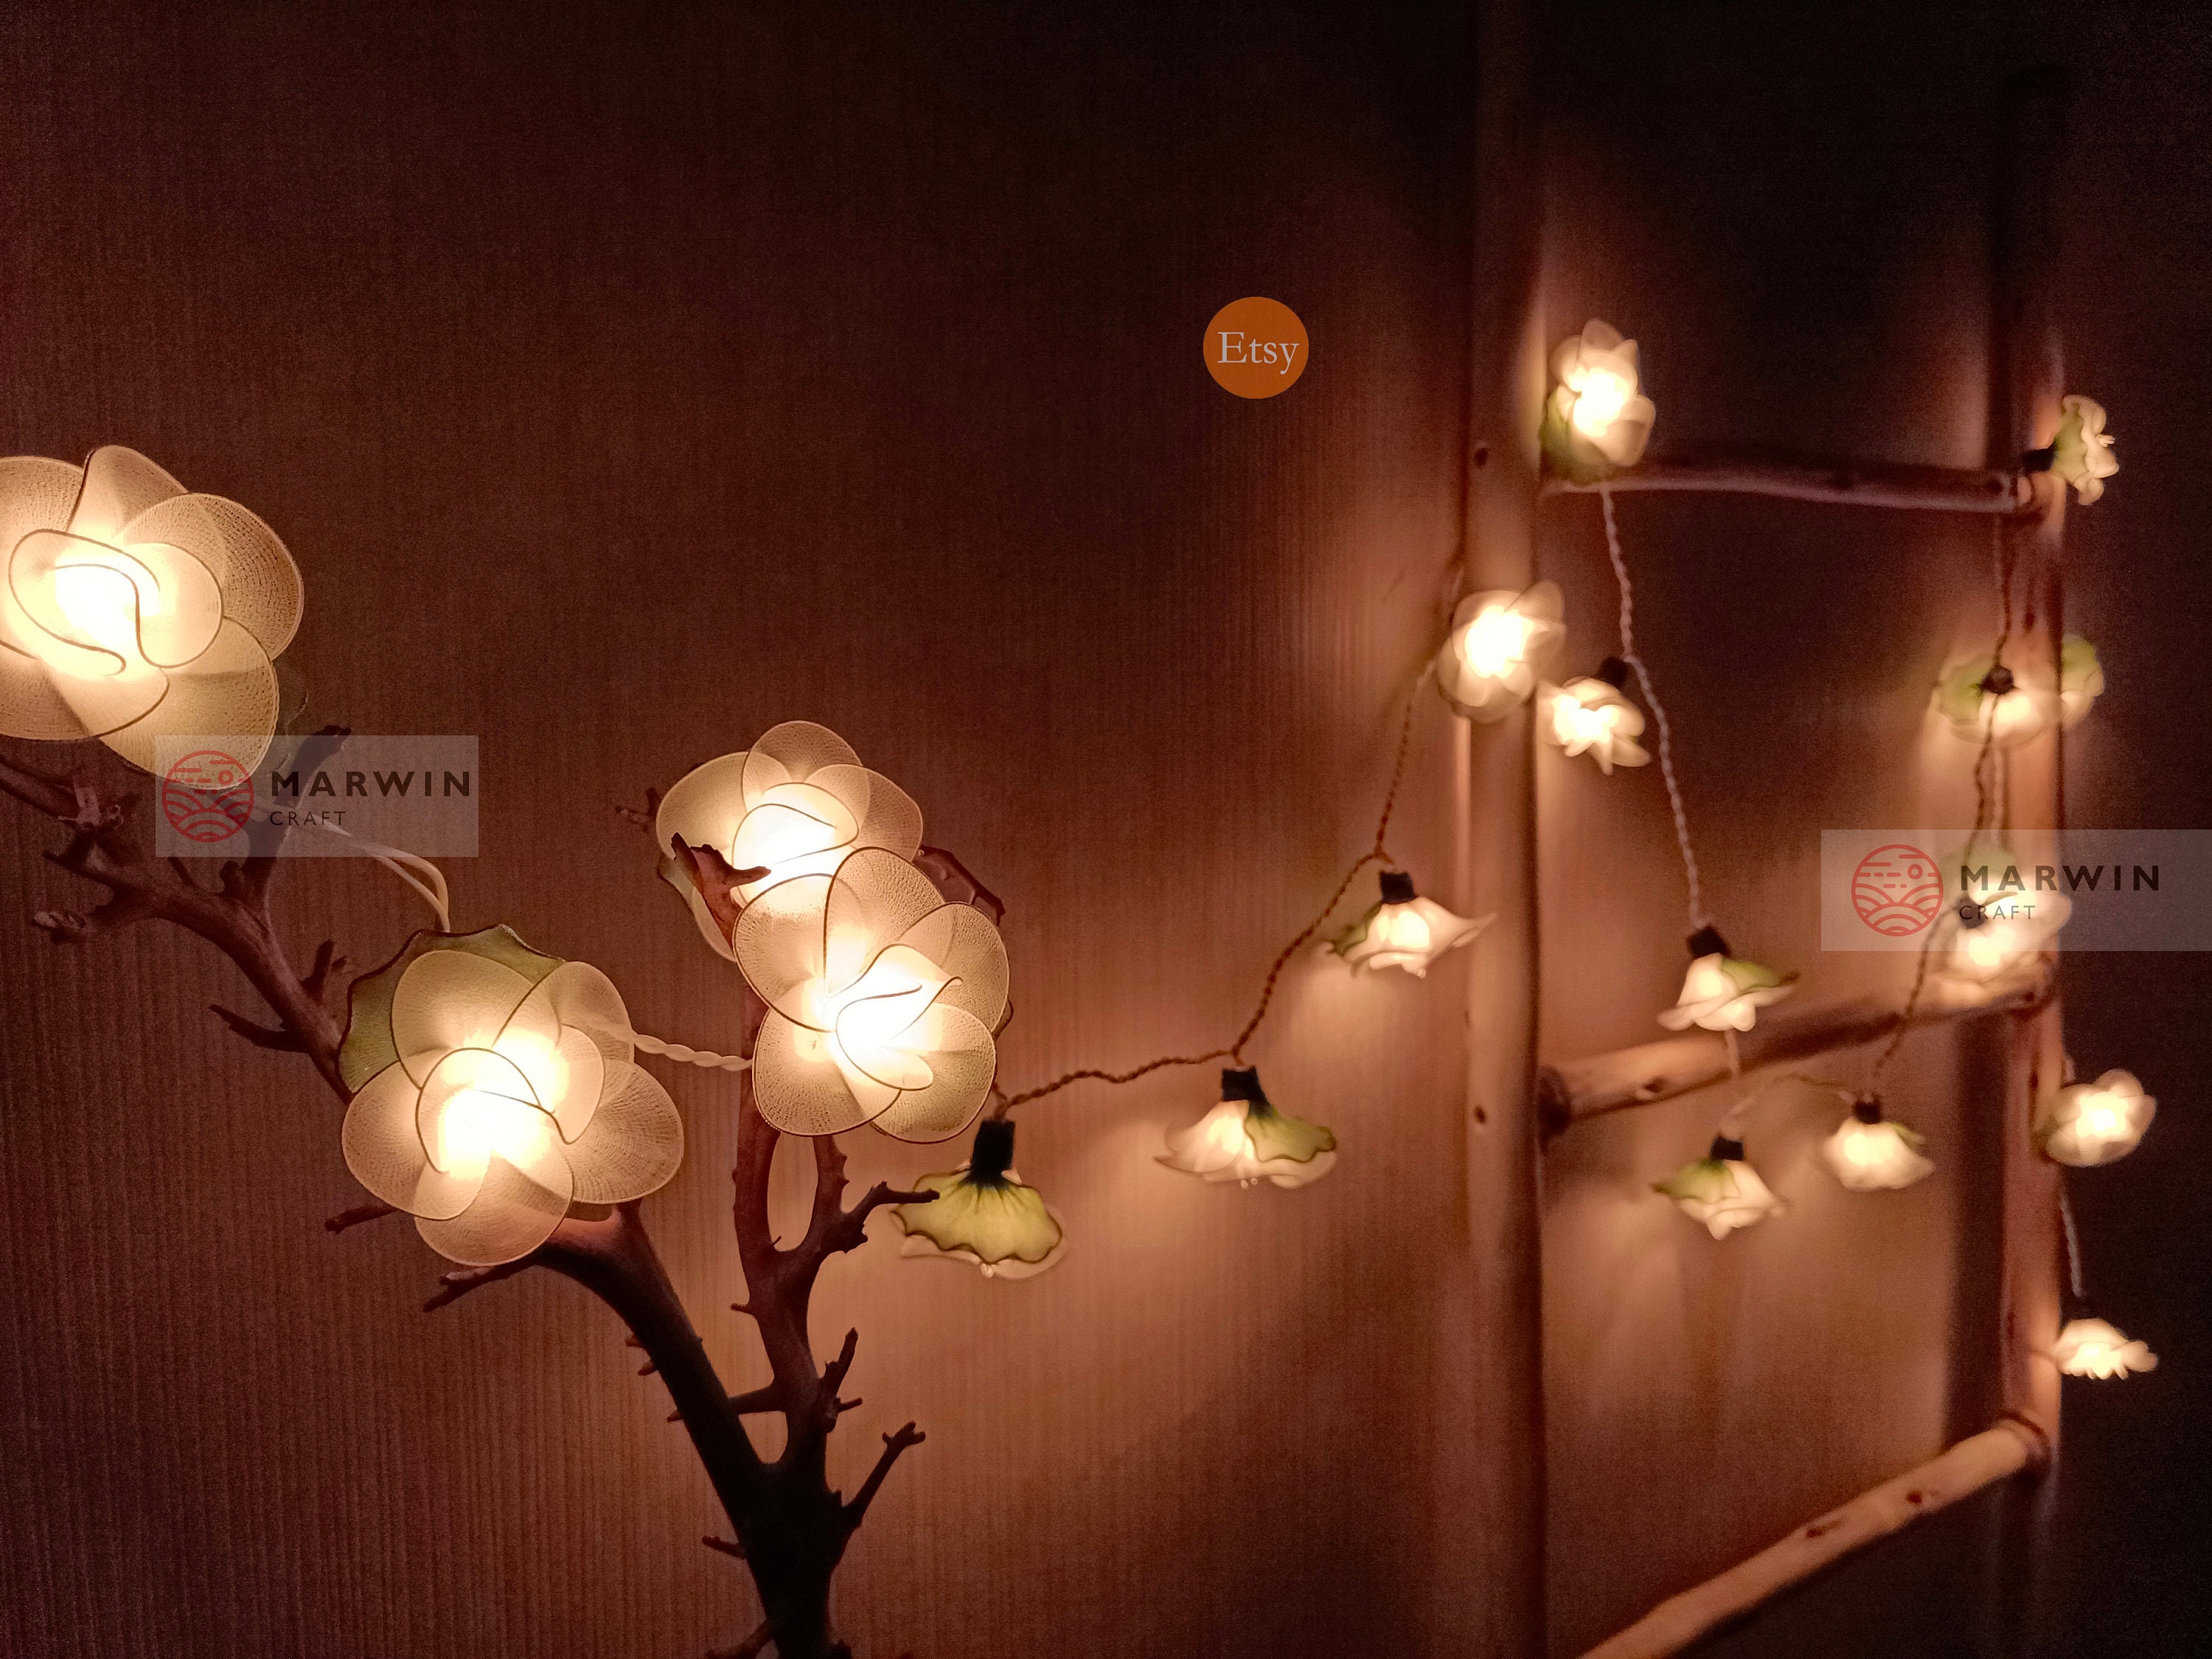 20LED Warm White Rose Flower Fairy String Lights 7.5 Feet Clear Cable Battery Powered for Valentines Built in Auto Timer echosari Bedroom Indoor Decoration SYNCHKG059540 Wedding